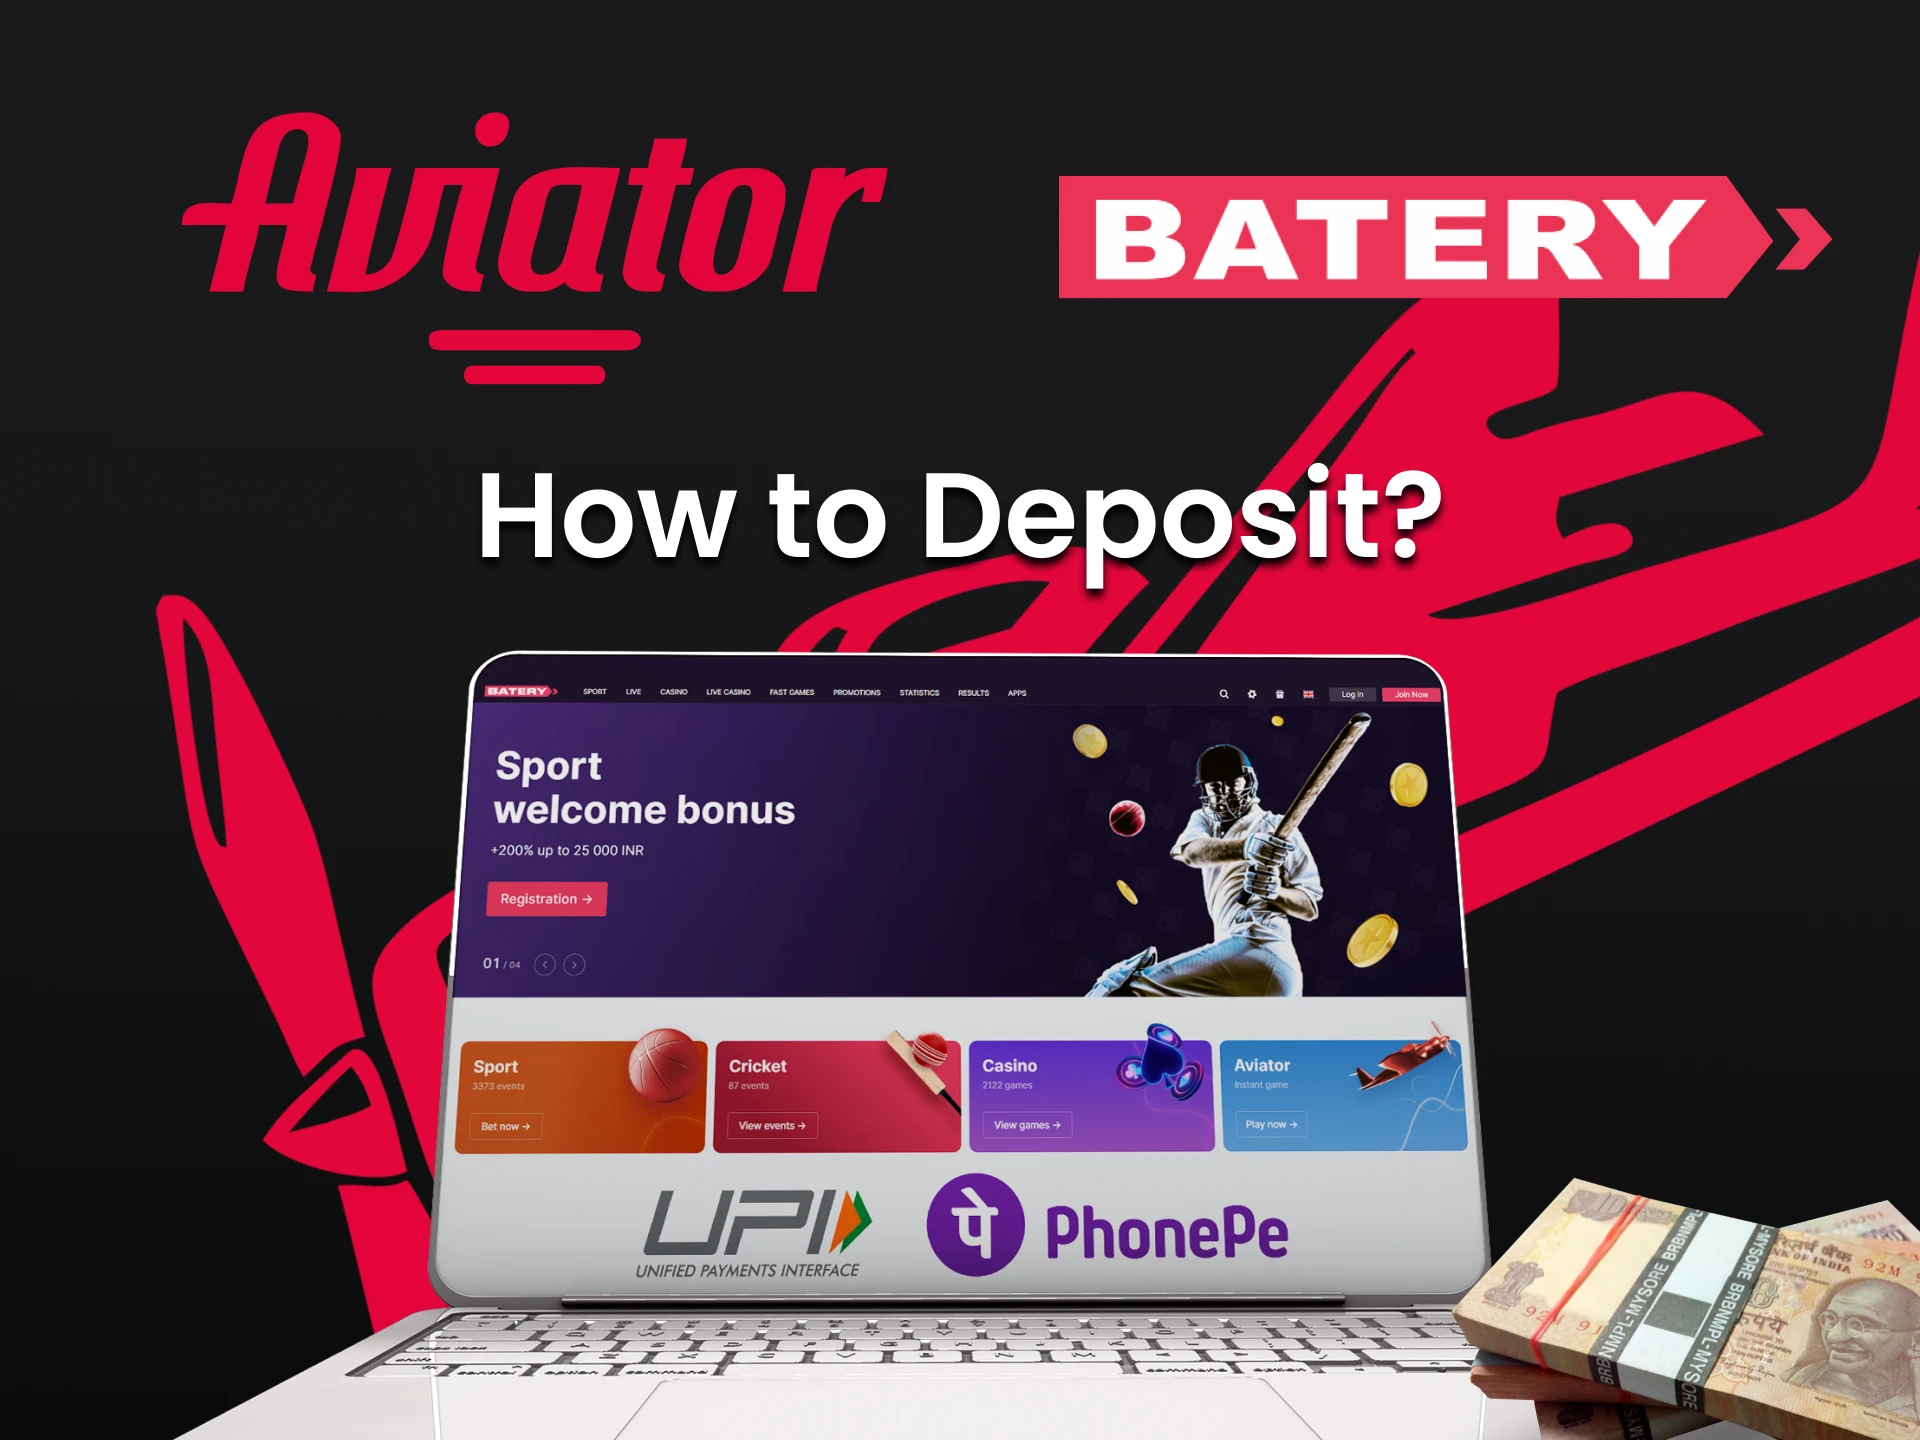 Make deposits in a convenient way on Batery.